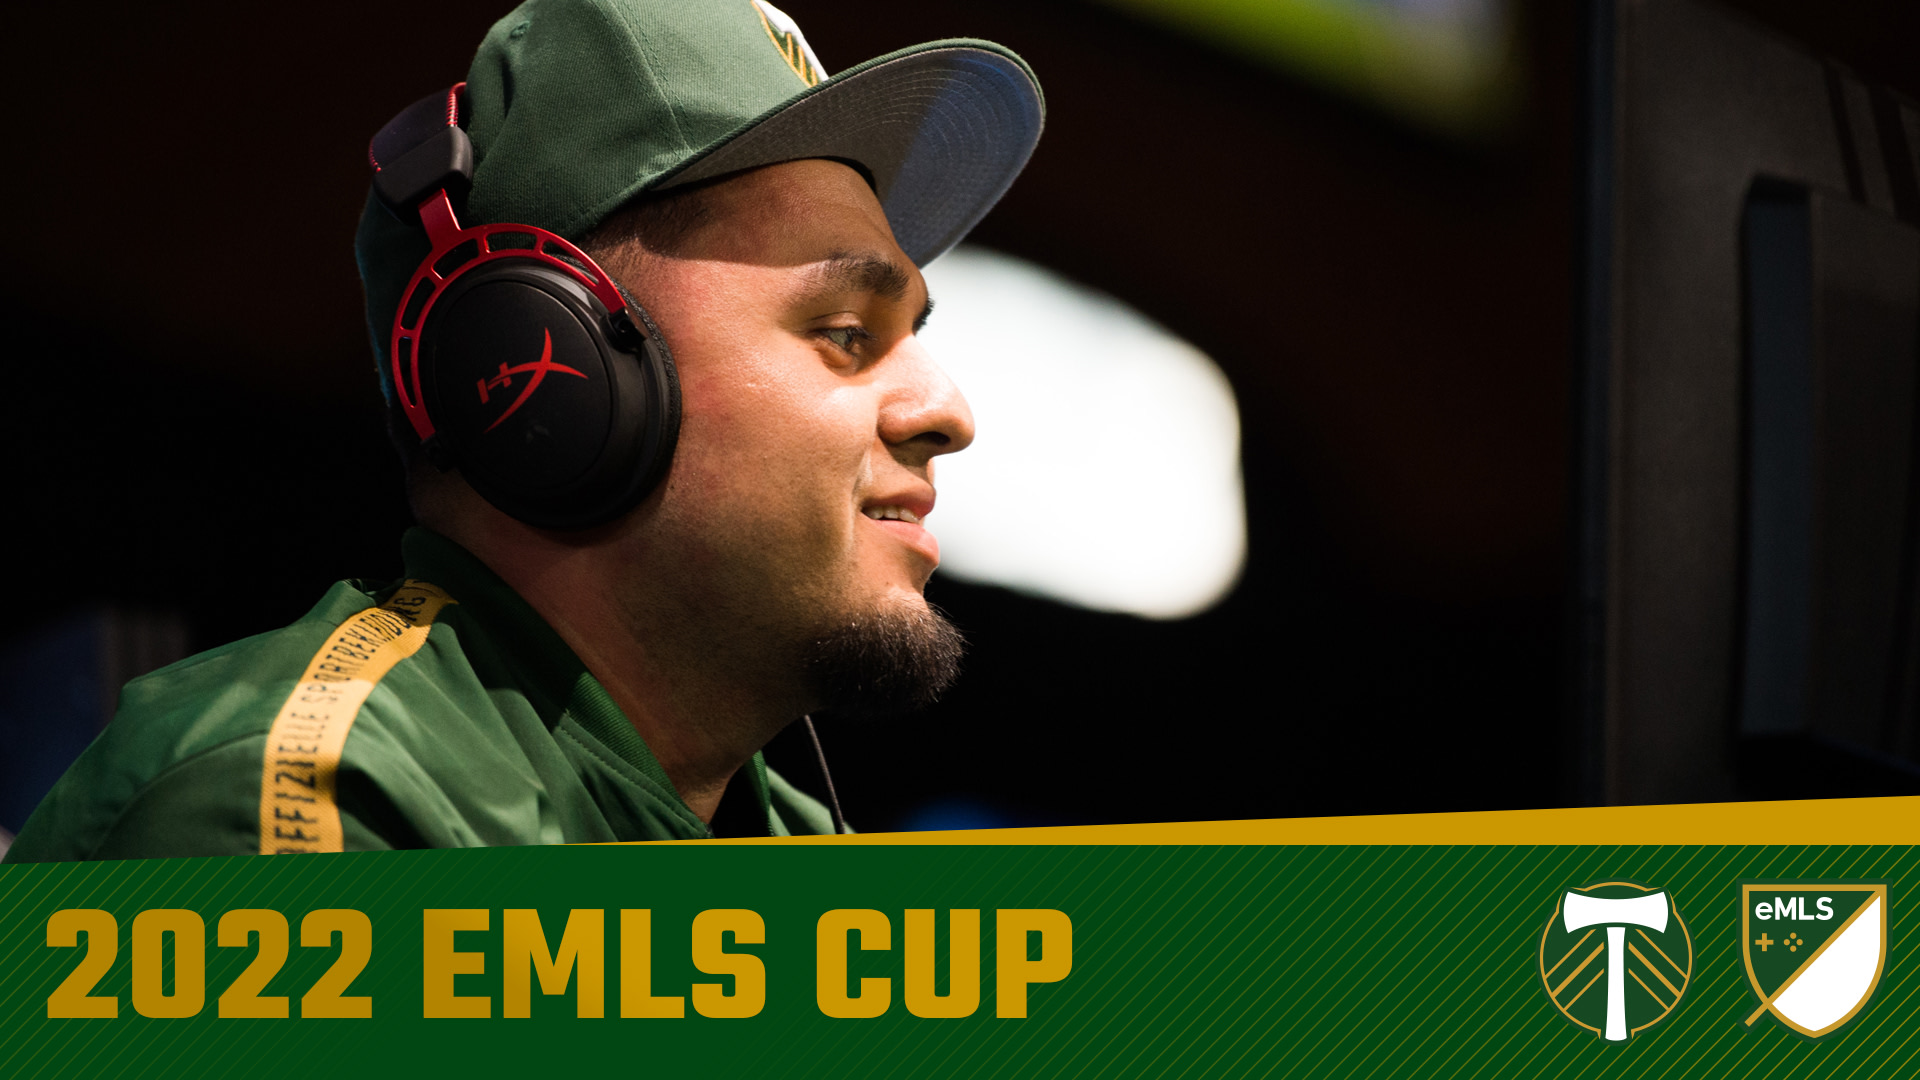 eMLS Cup How to follow RCTID Thiago, LeahRevelle and the Timbers this weekend + earn fun FIFA items PTFC